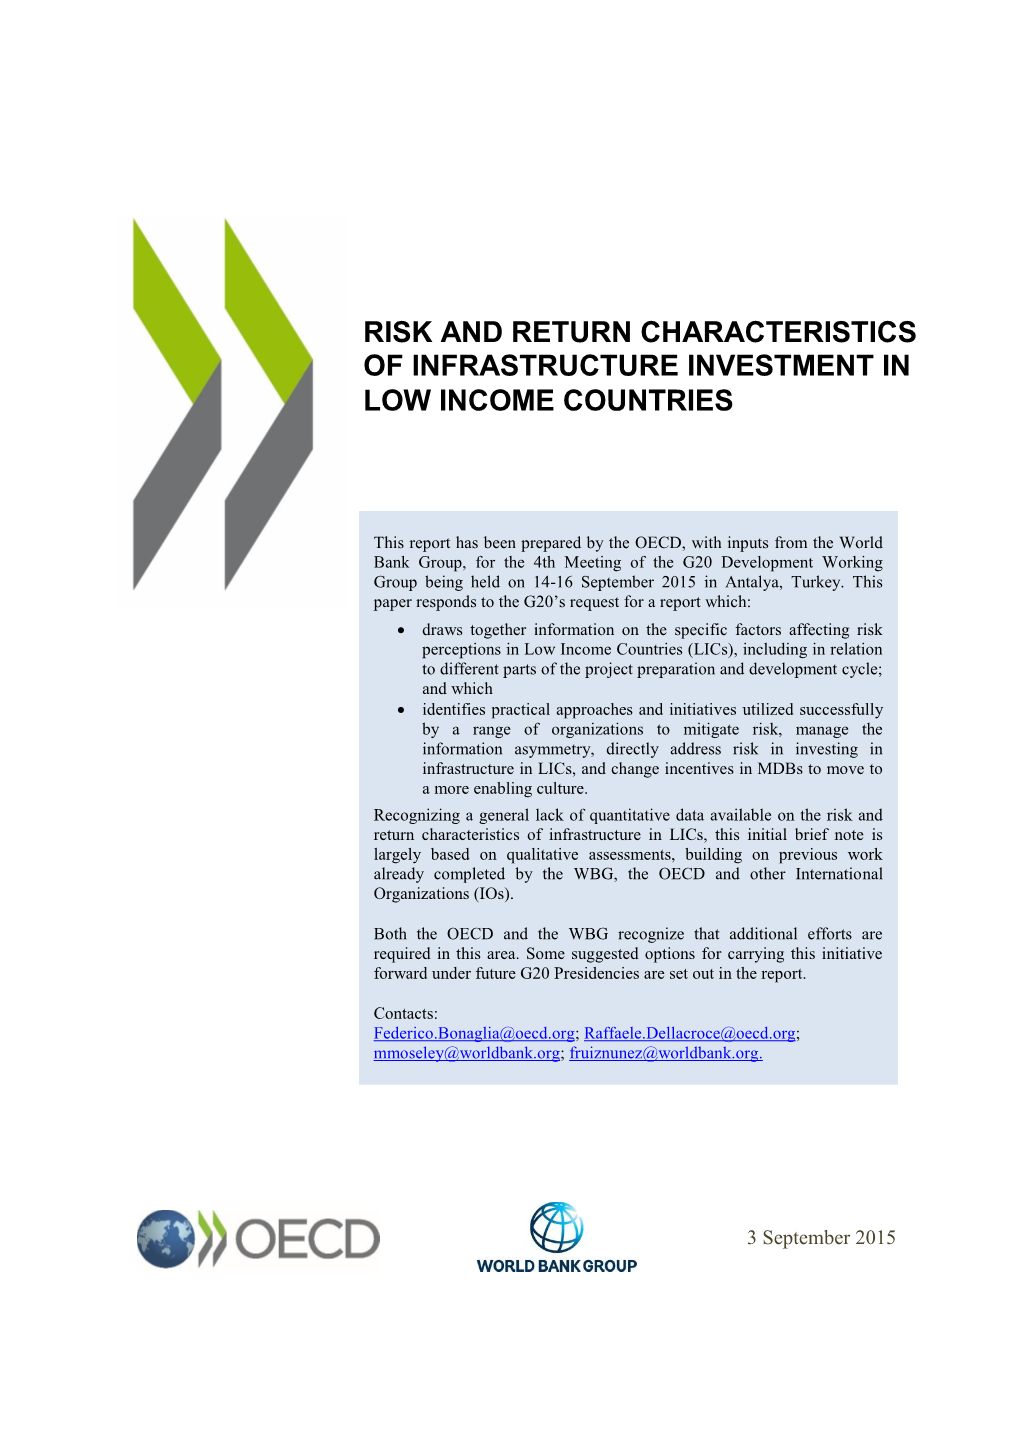 Risk and Return Characteristics of Infrastructure Investment in Low Income Countries